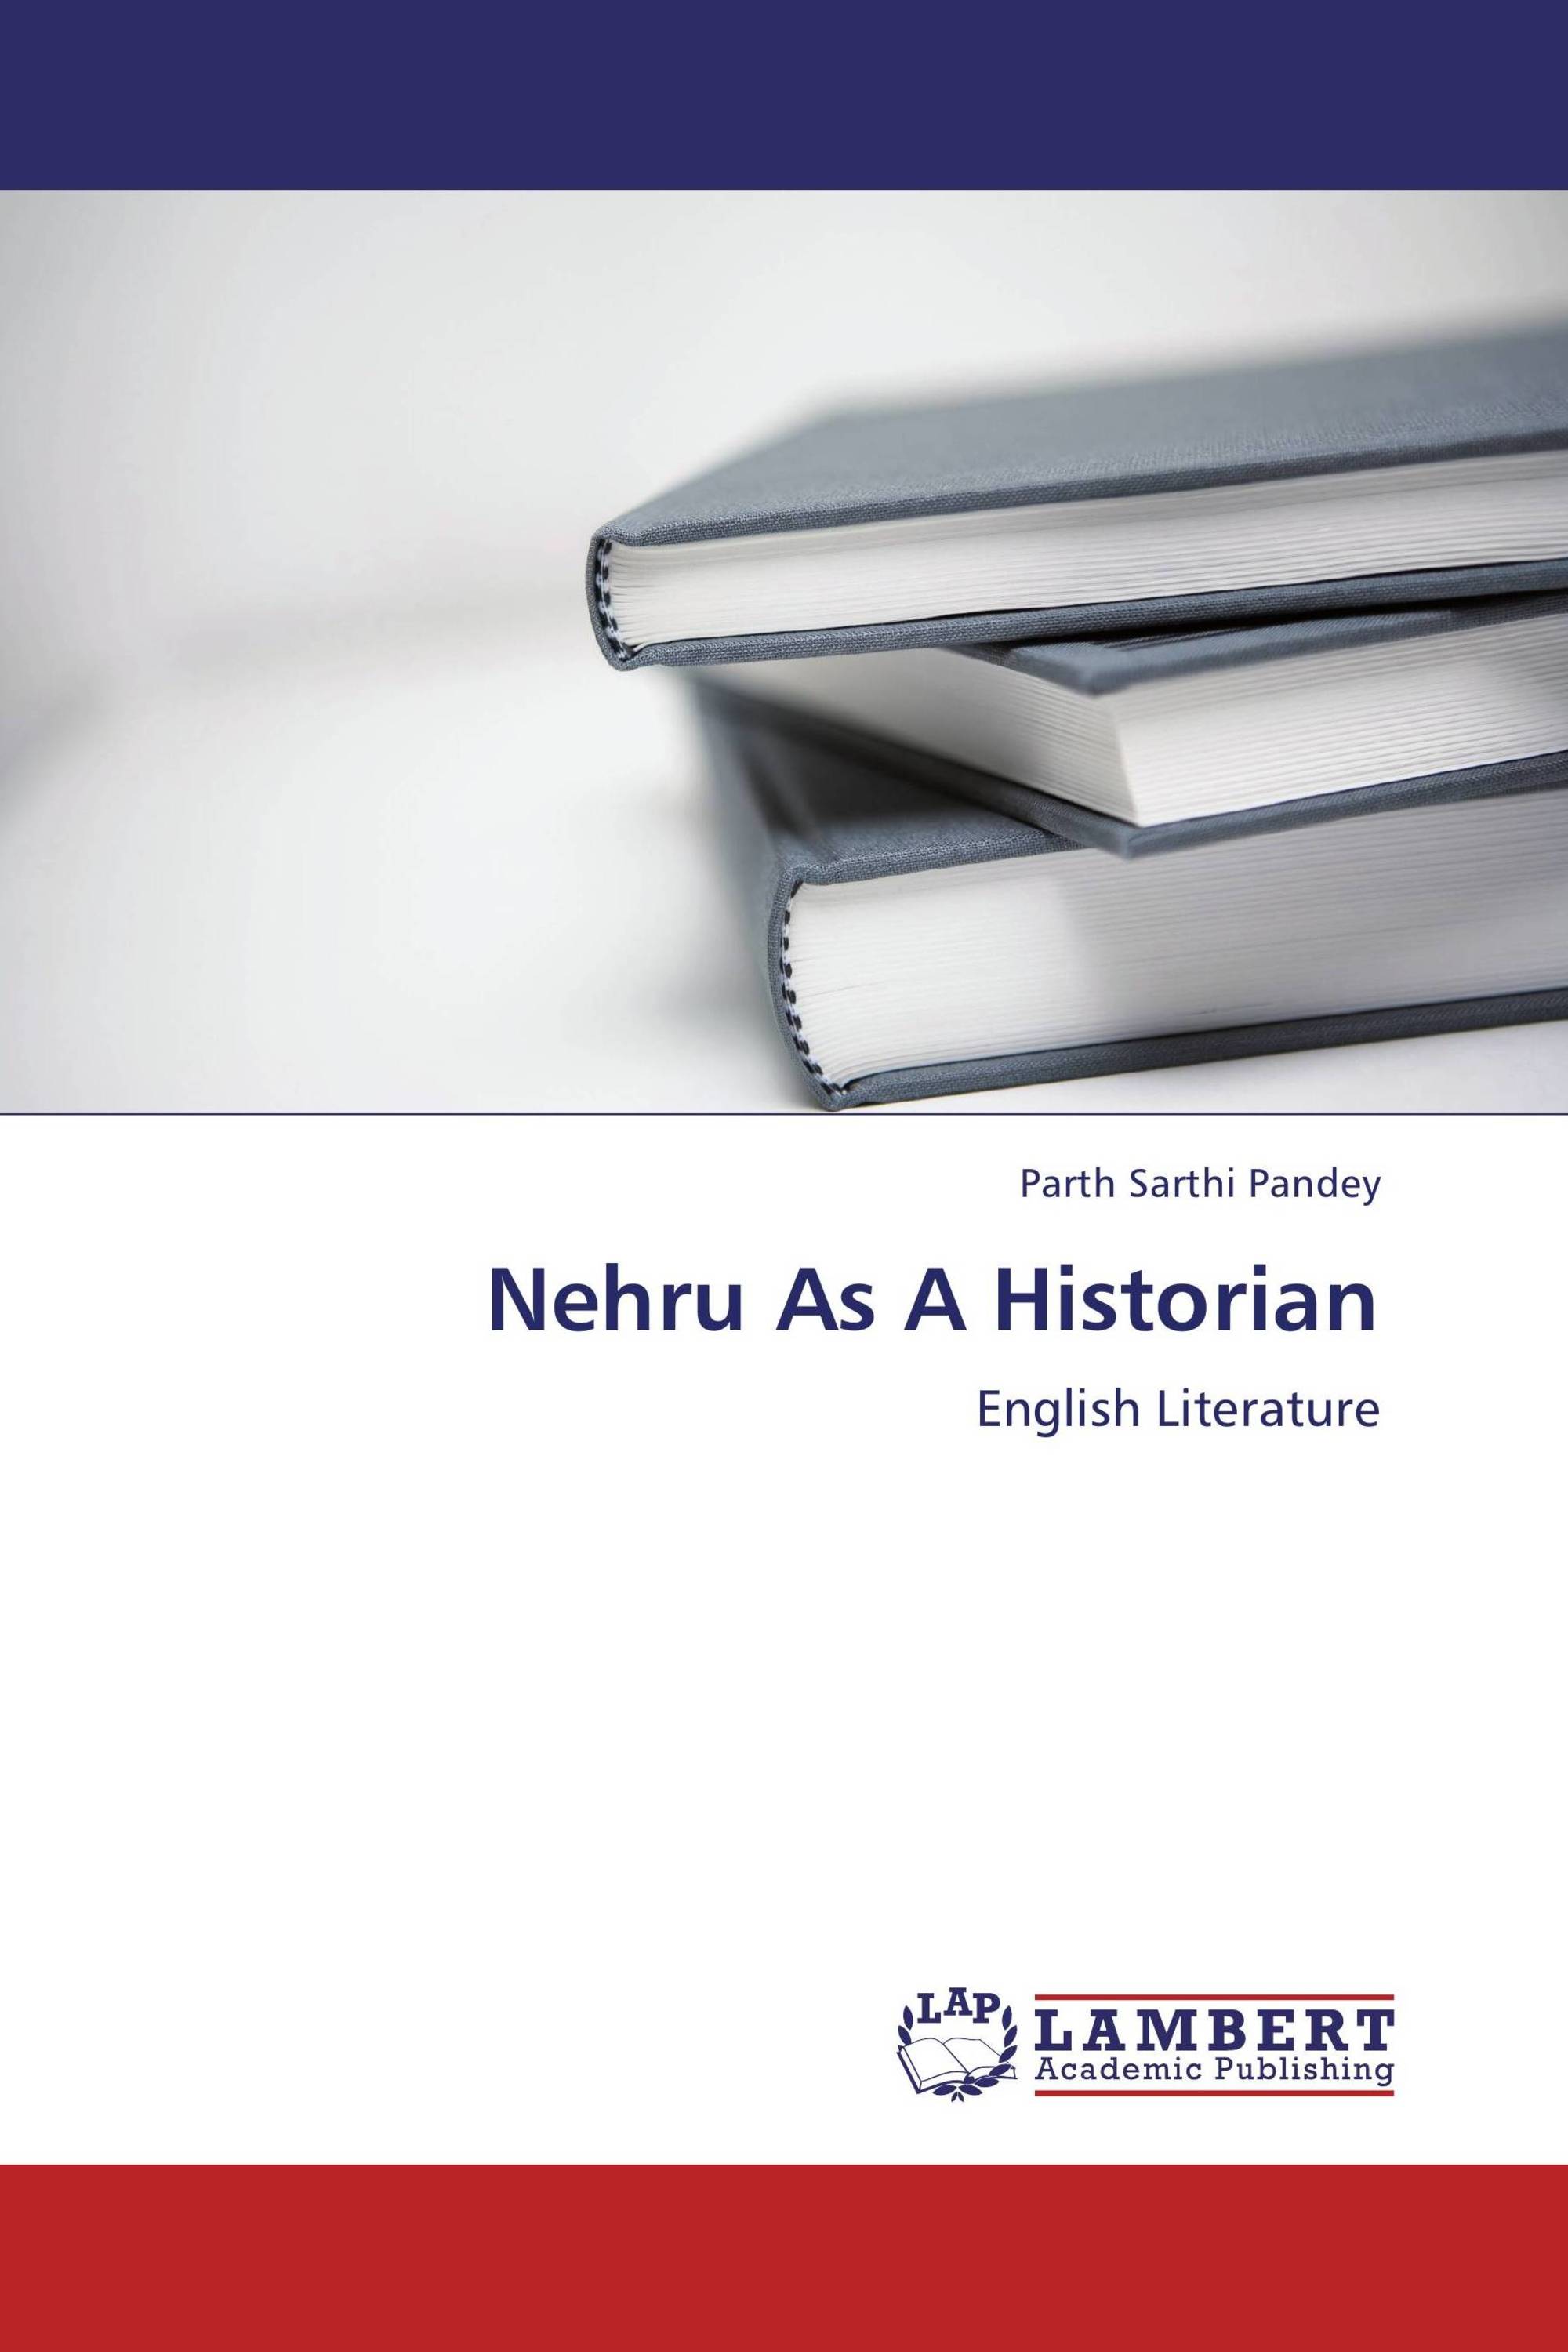 Nehru and the Language Politics of India by Robert D. King